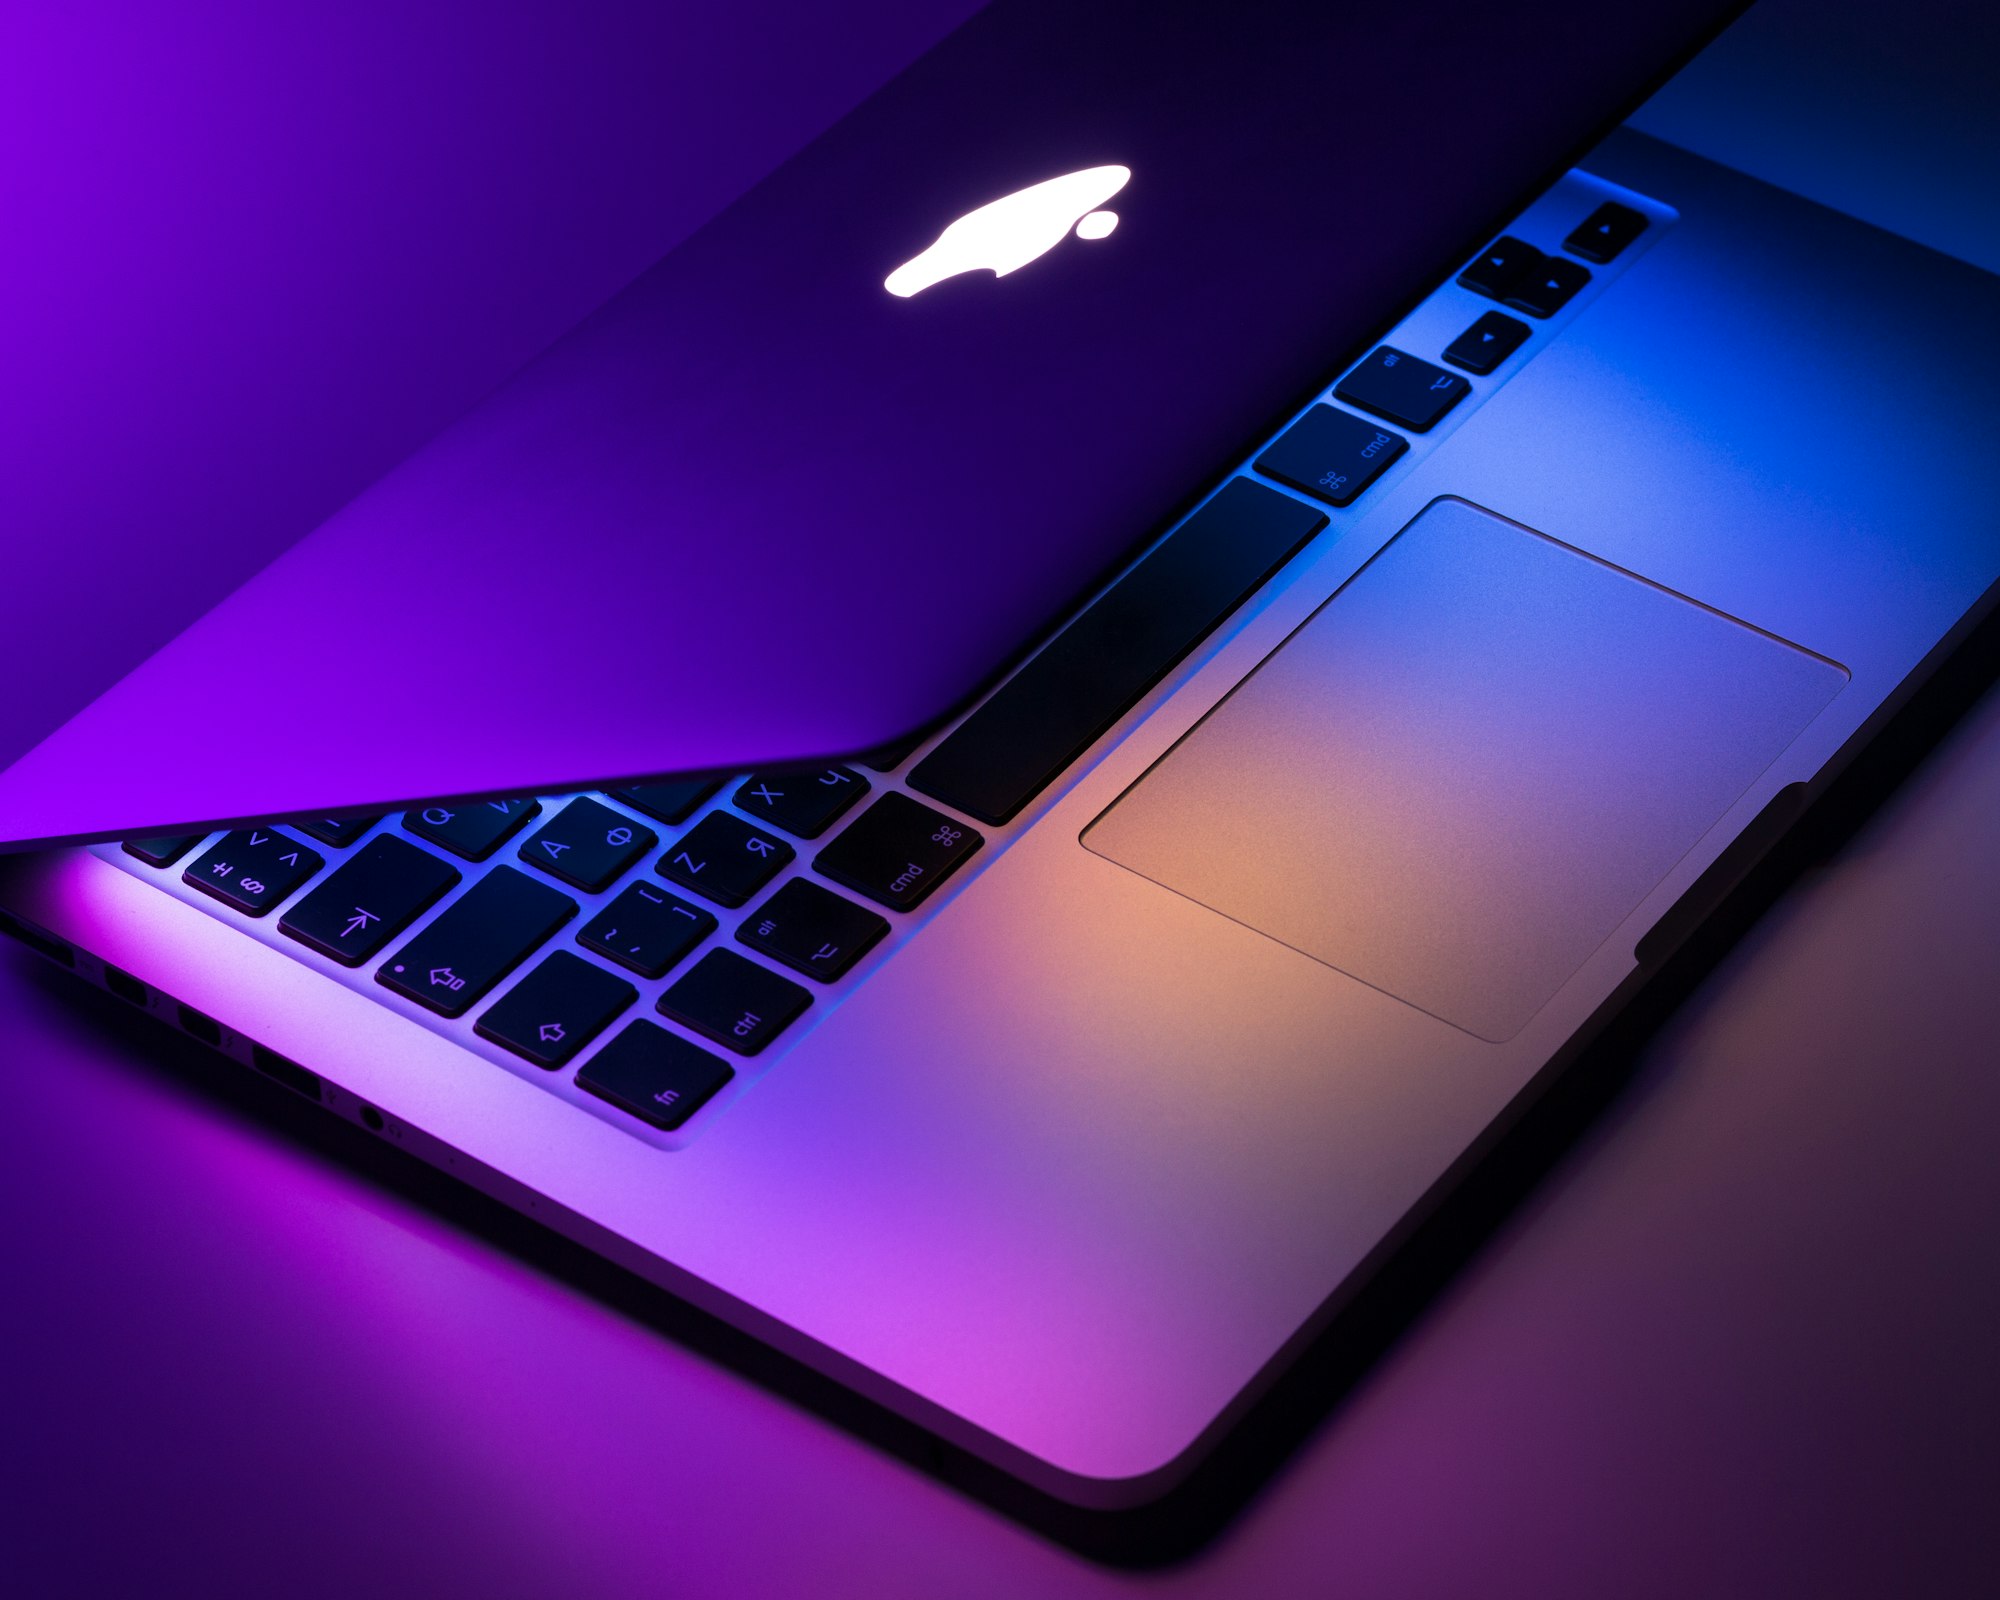 7 Tools for MAC that can be helpful for DEVs